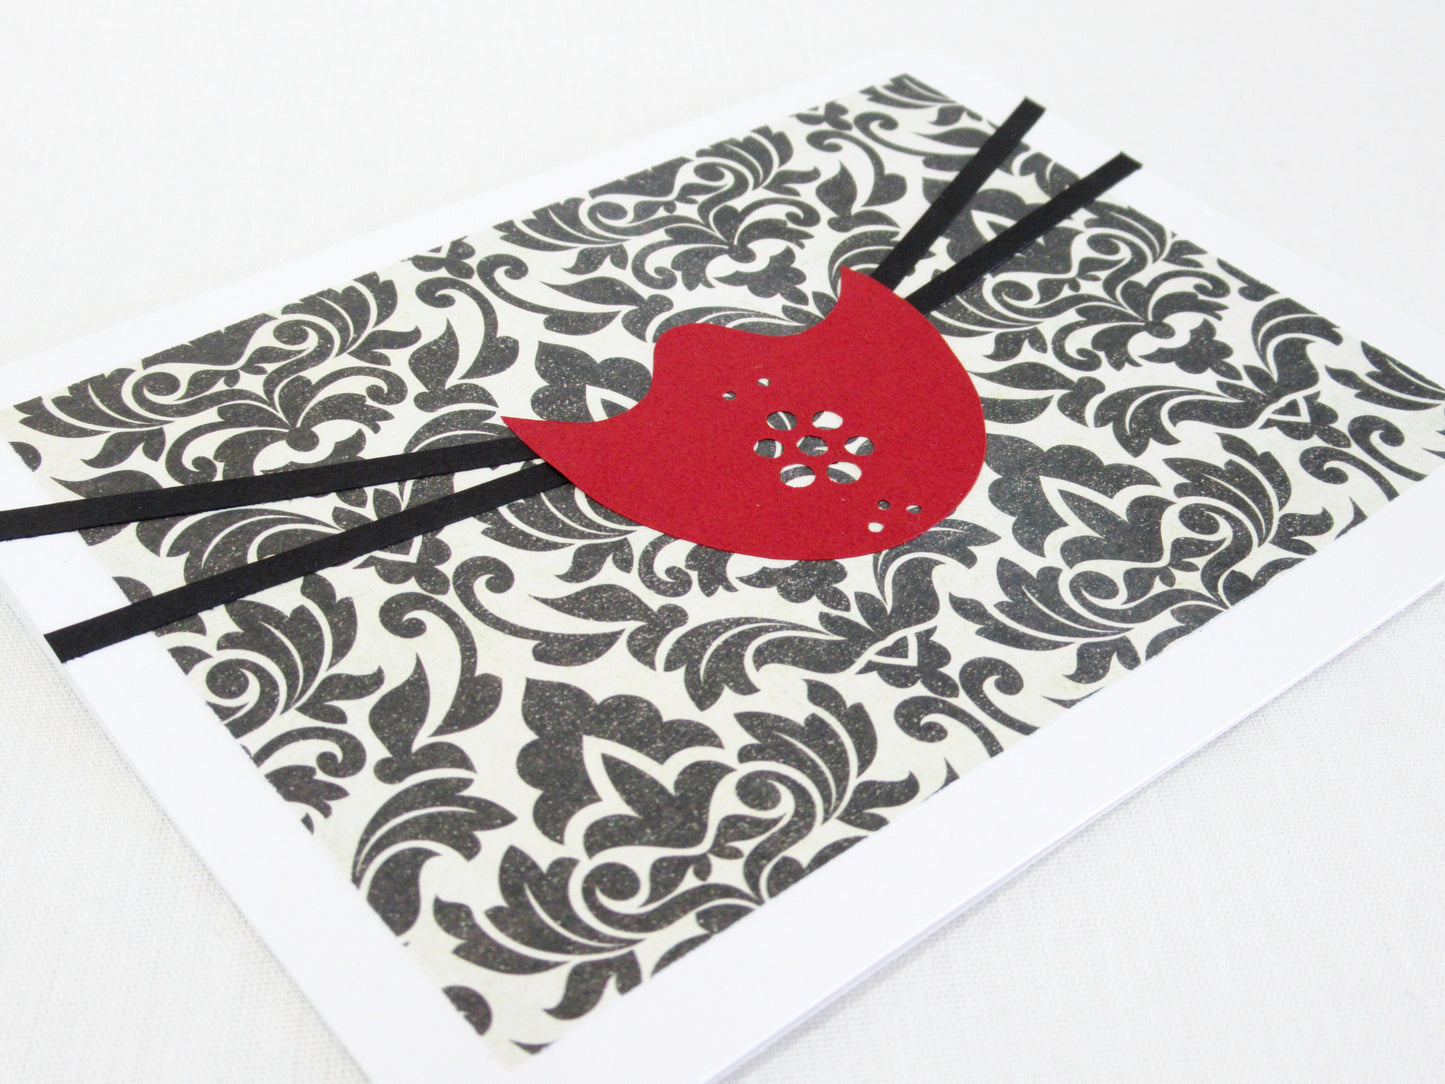 A card lays at an angle on a white desk. The front of the card has an inset with a black and white fillegre background. On top is a red mask that covers just the nose and chin with holes for breathing. Two black straps come out of either side and stretch to the edge of the card. The mask is designed to look like one used in the NBC show Hannibal.